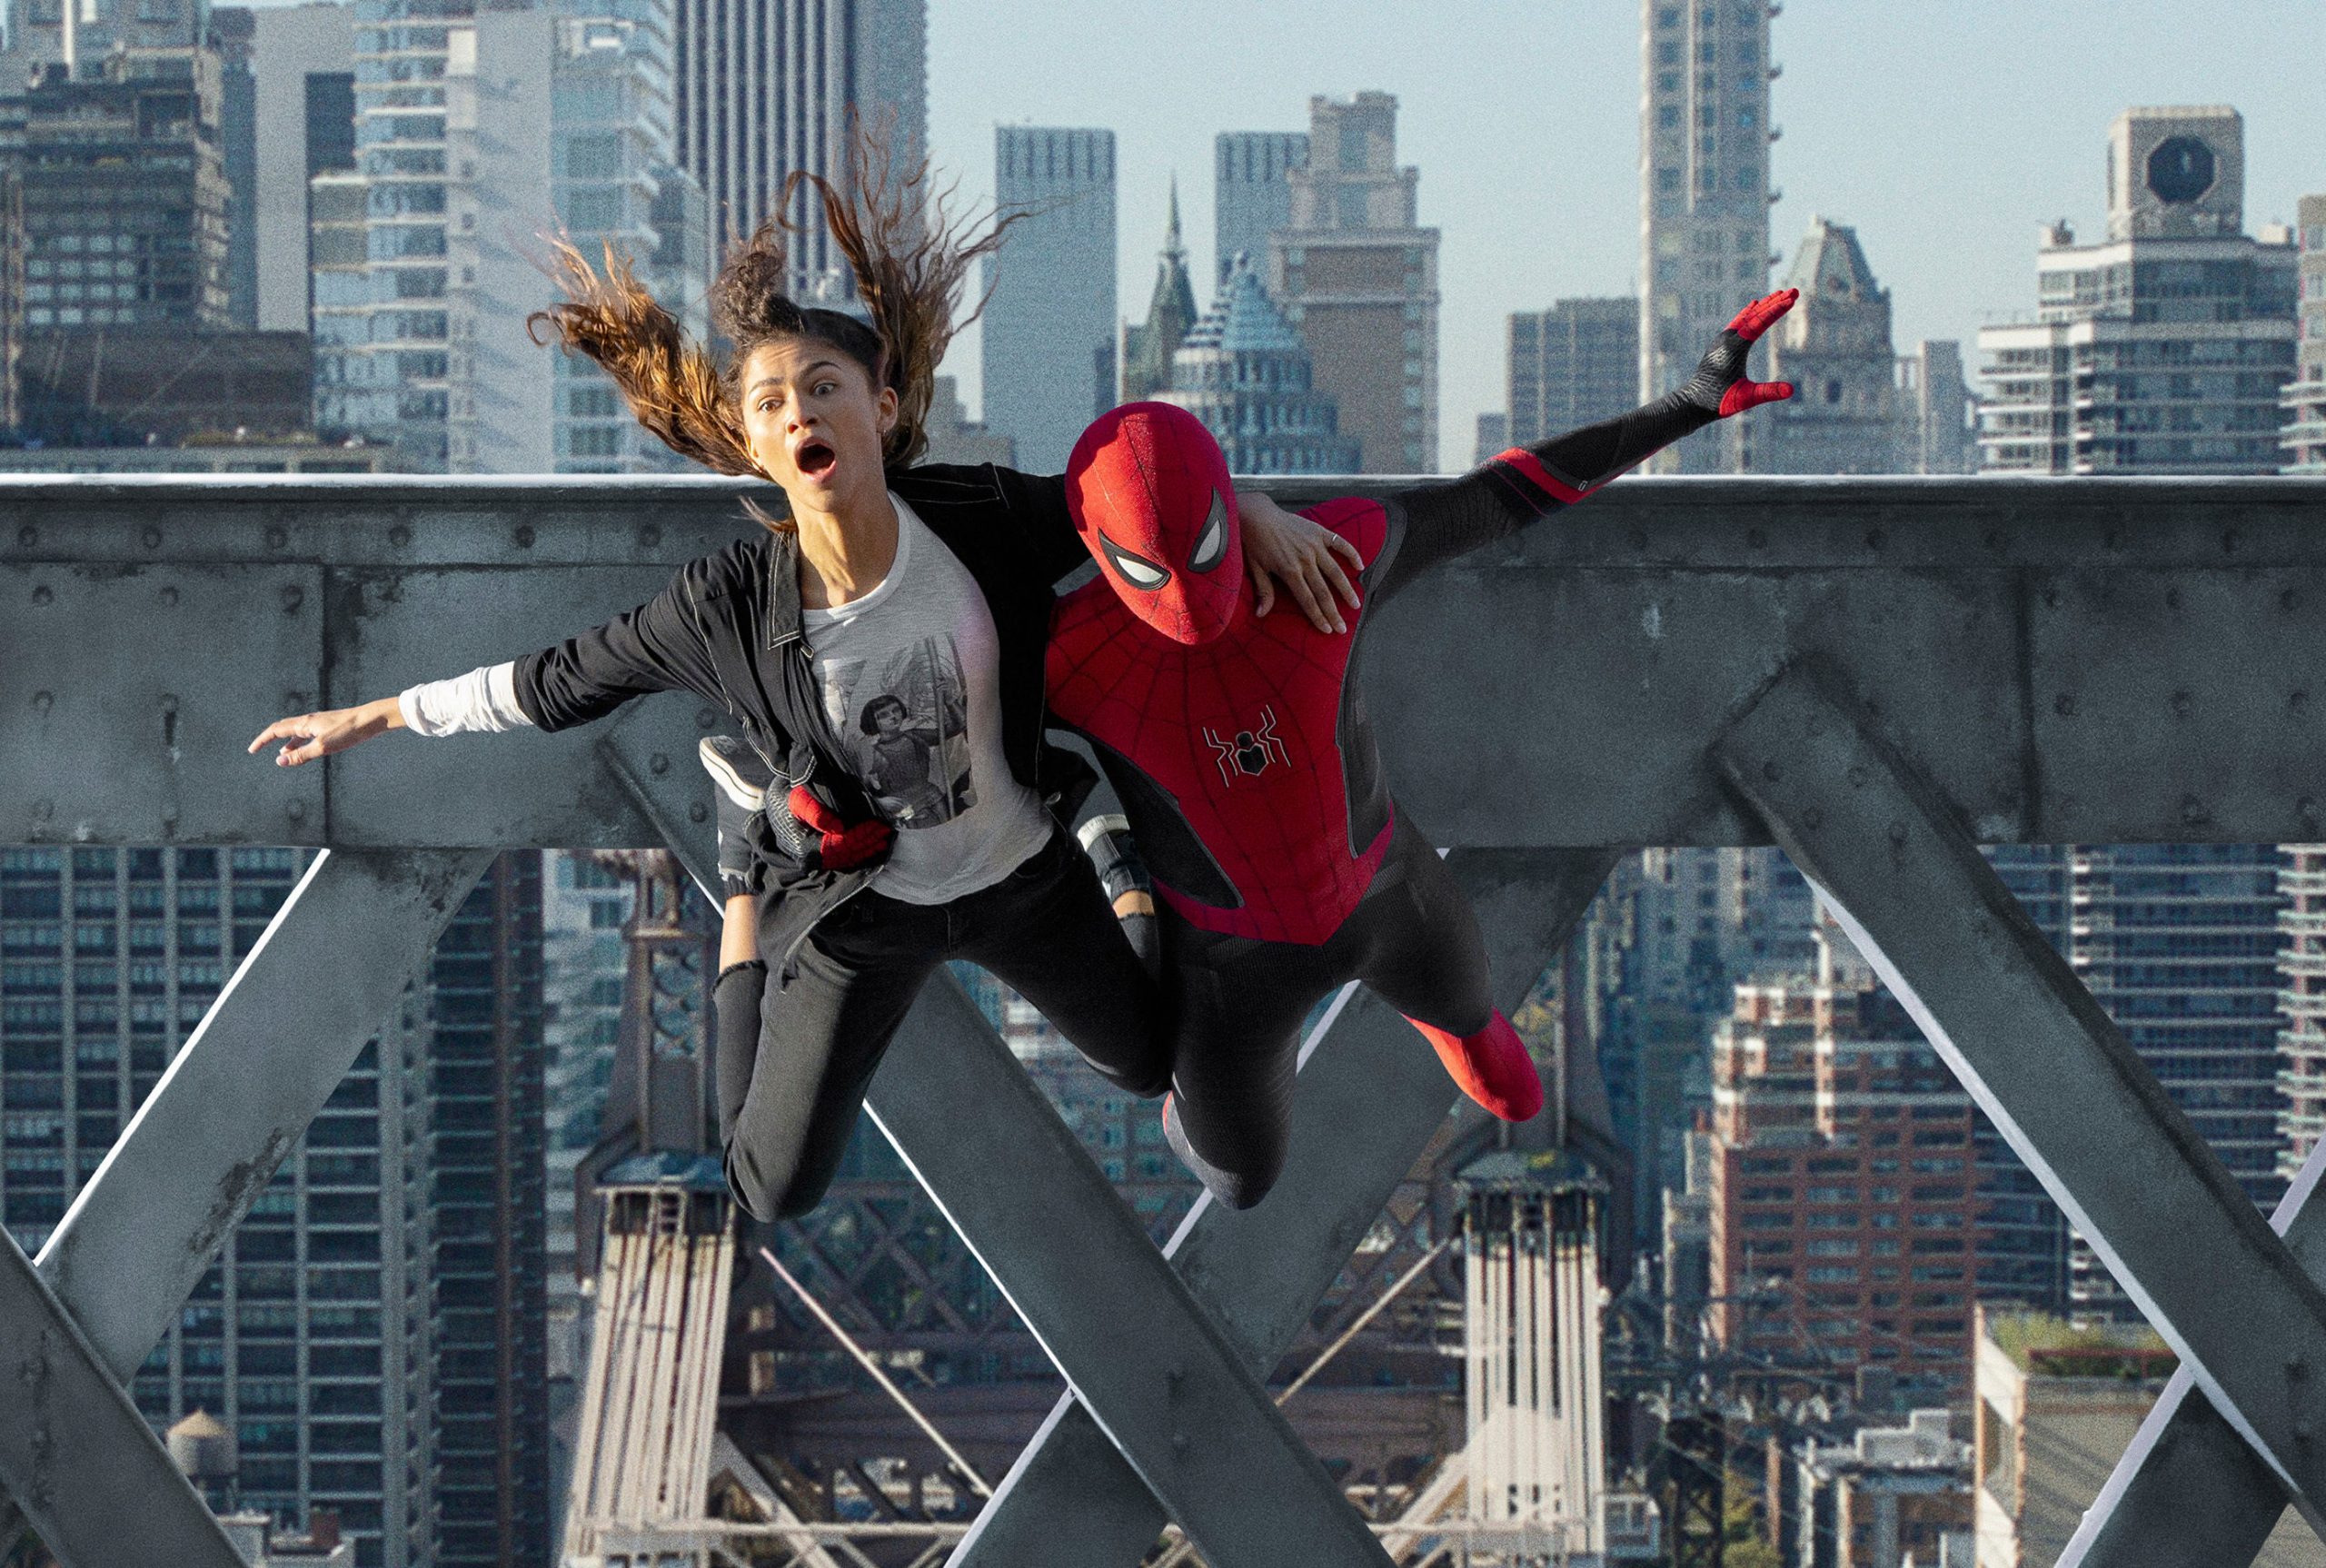 On a quiet weekend in theaters, ‘Spider-Man’ is No. 1 again